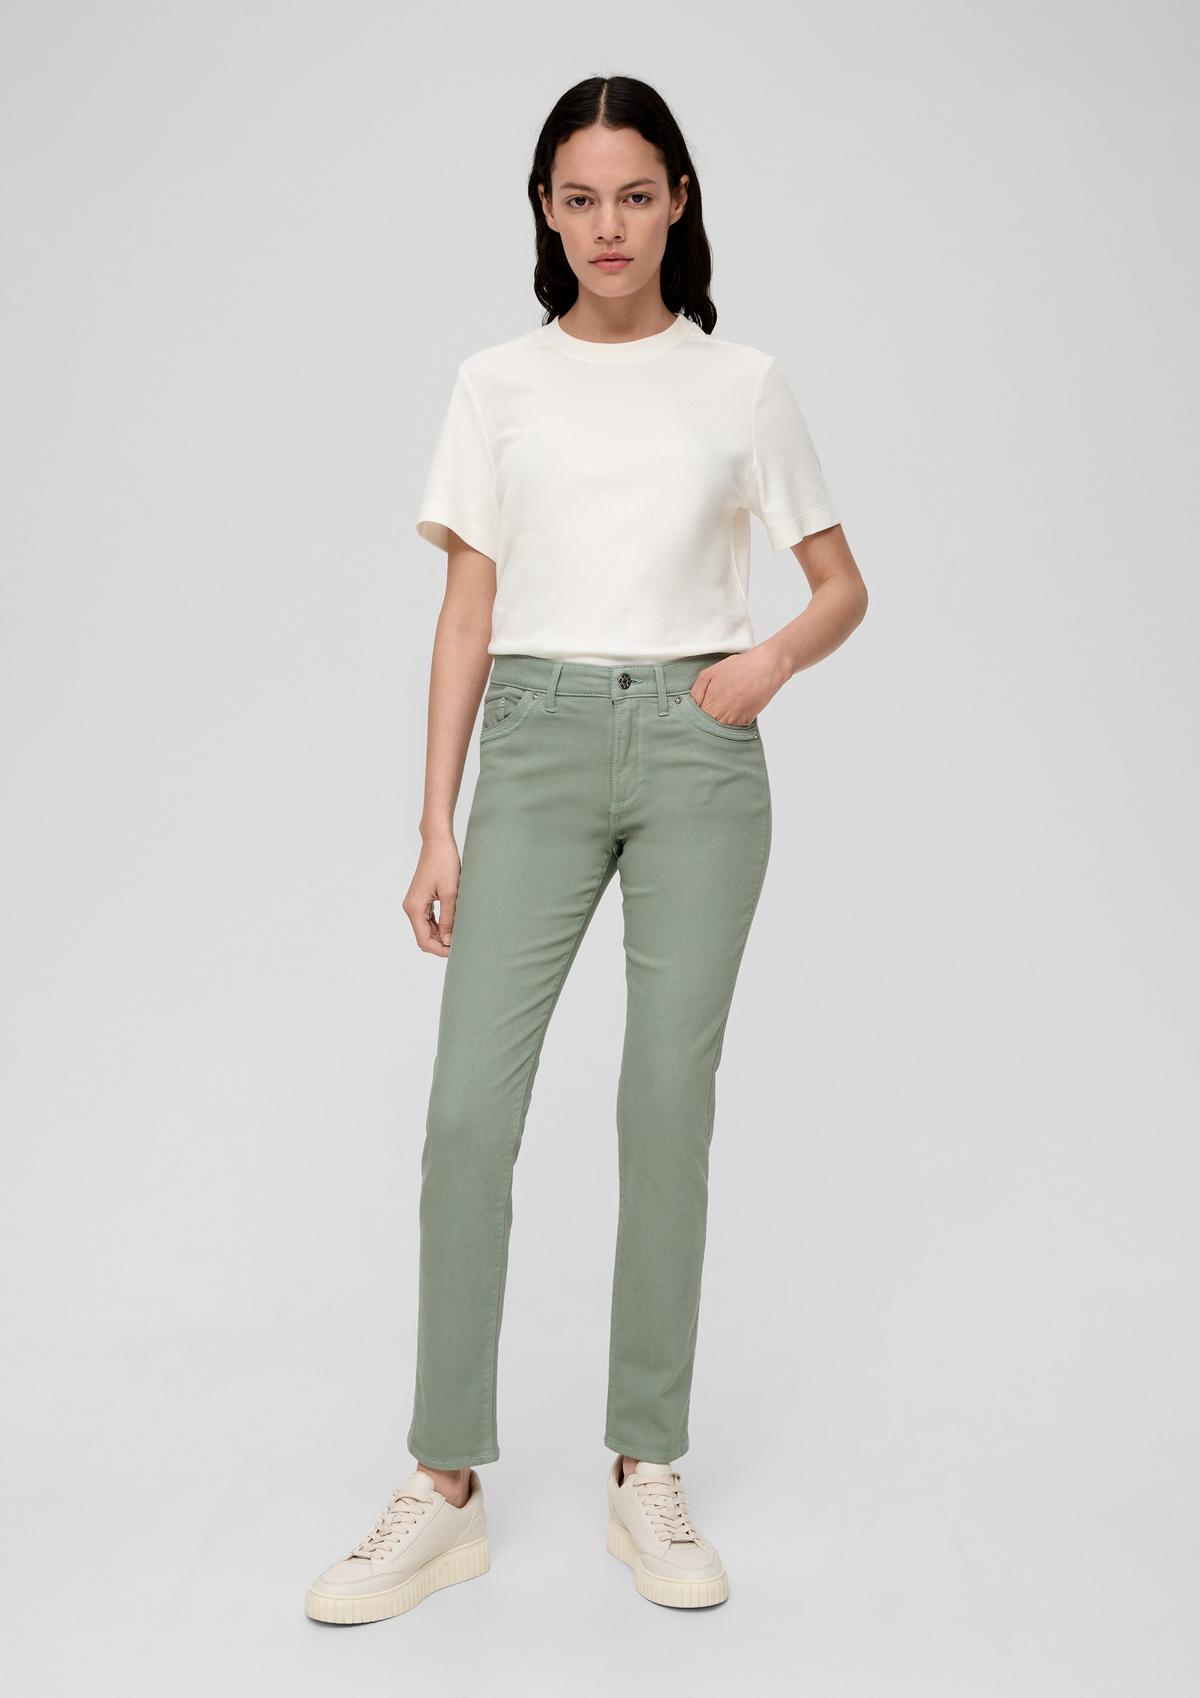 s.Oliver Denim trousers